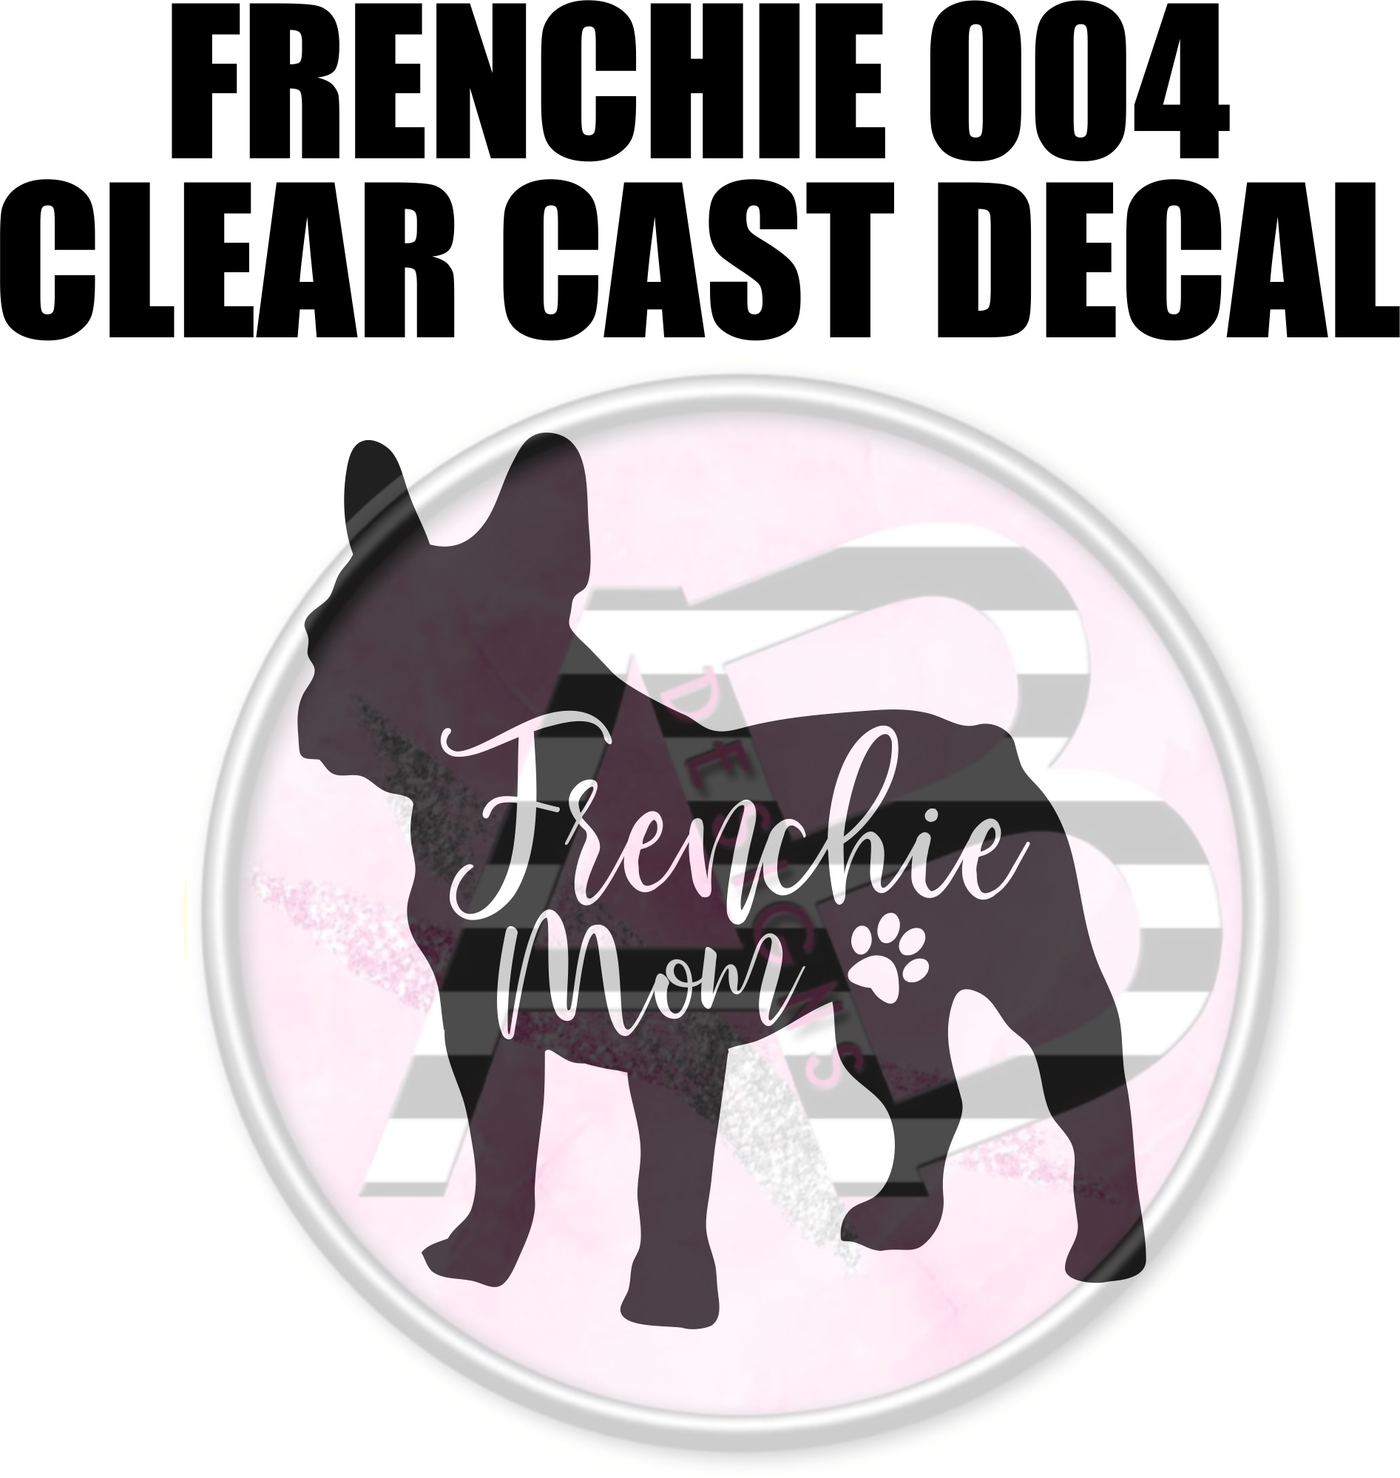 Frenchie 004 - Clear Cast Decal